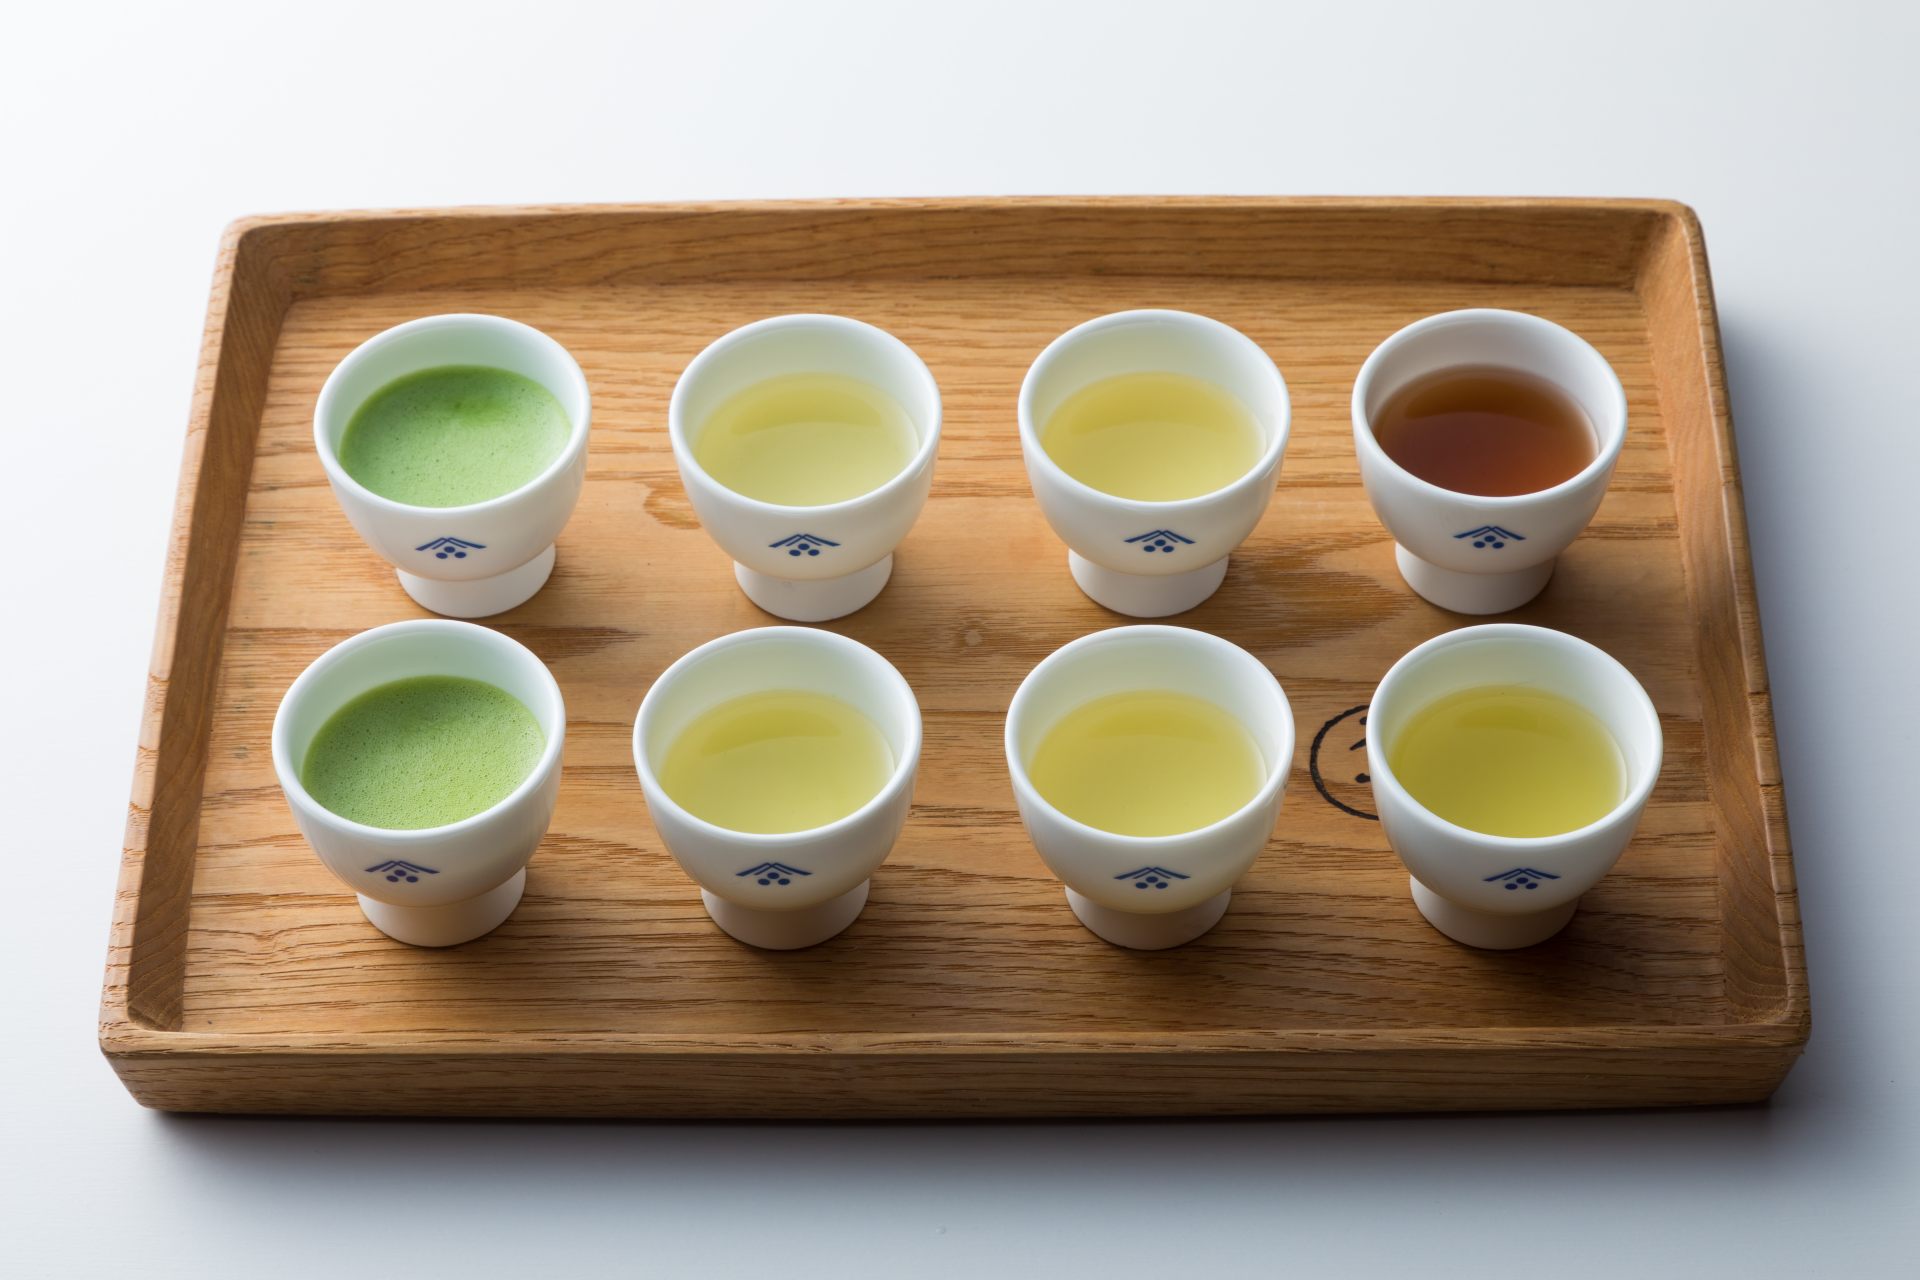 “Japanese tea” – only two words but so many flavors and aromas,